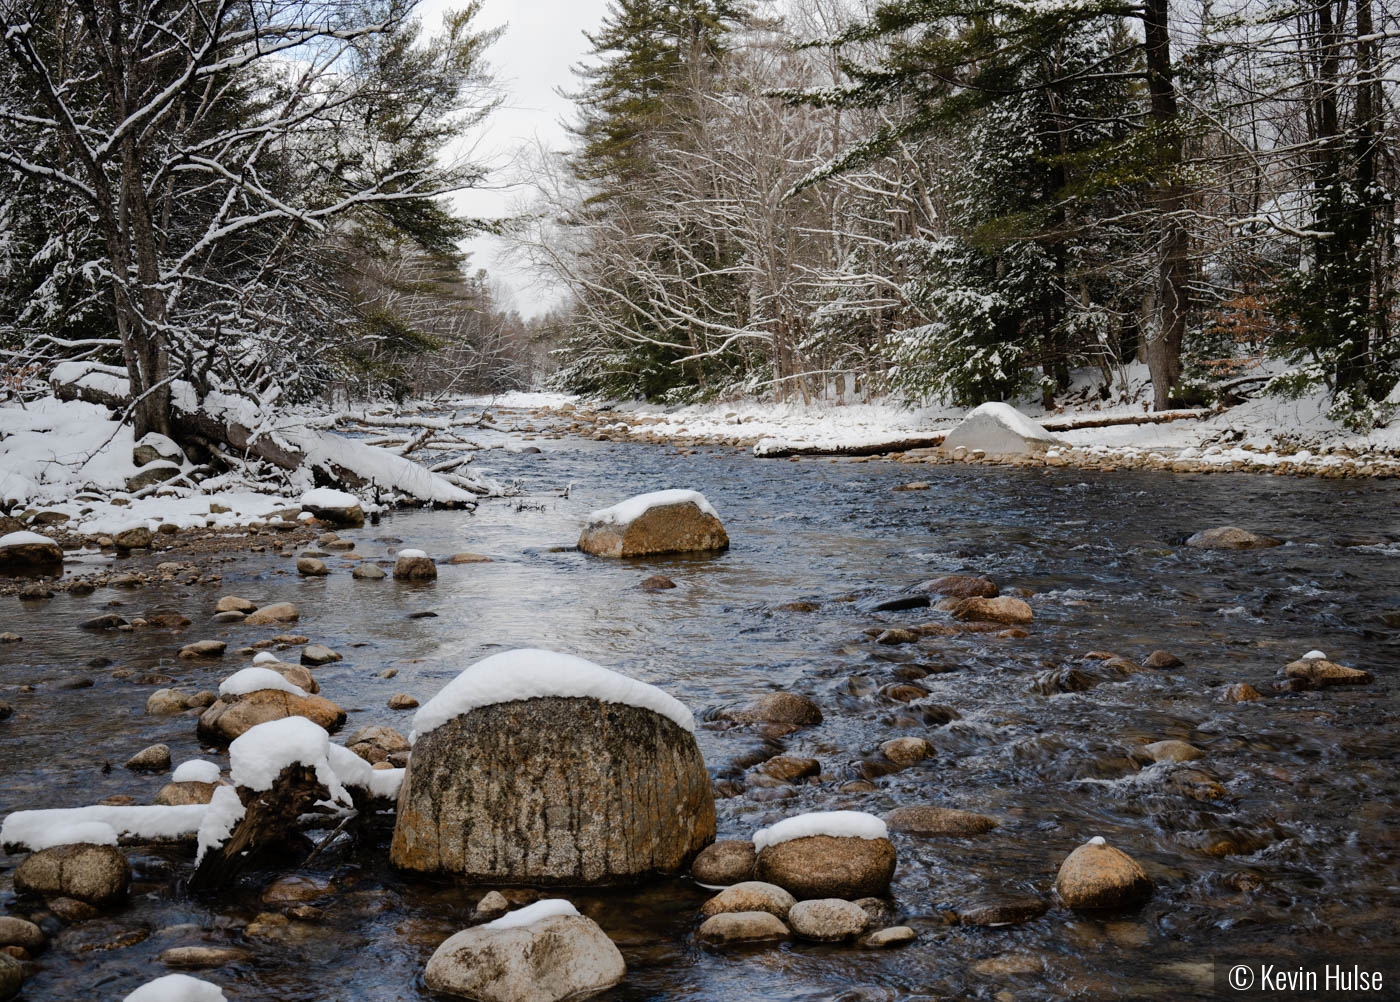 New Hampshire Stream in Winter by Kevin Hulse